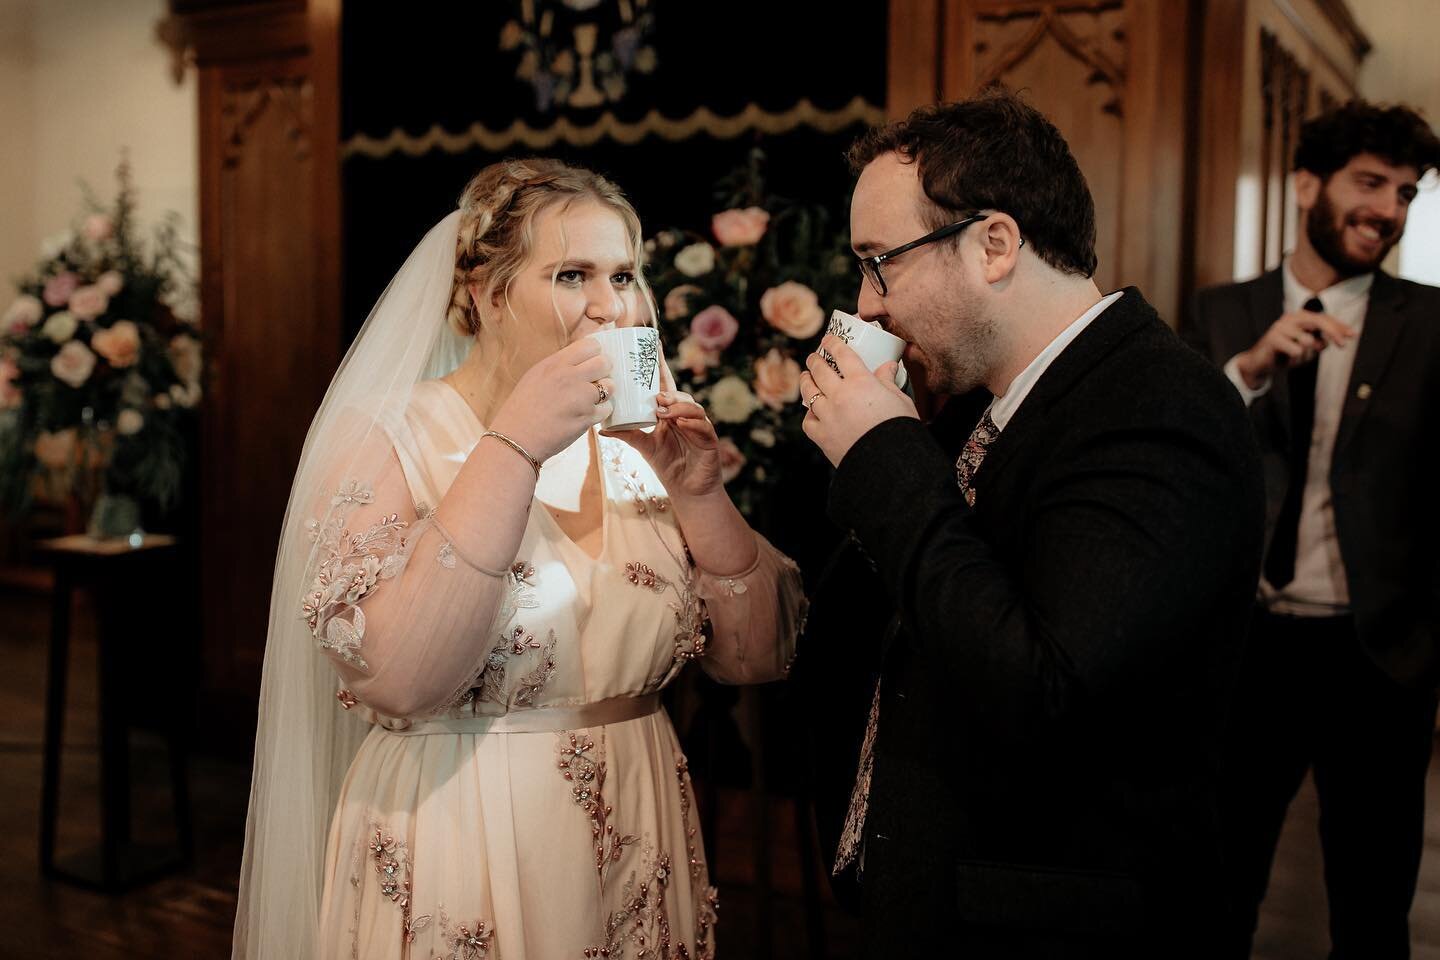 IT&rsquo;S IN THE DETAILS // one of my favourite things about wedding ceremonies is that the legal bit is pretty short, meaning you can make your ceremony exactly what you want it to be! For us, we made each other a cup of peppermint tea after we had